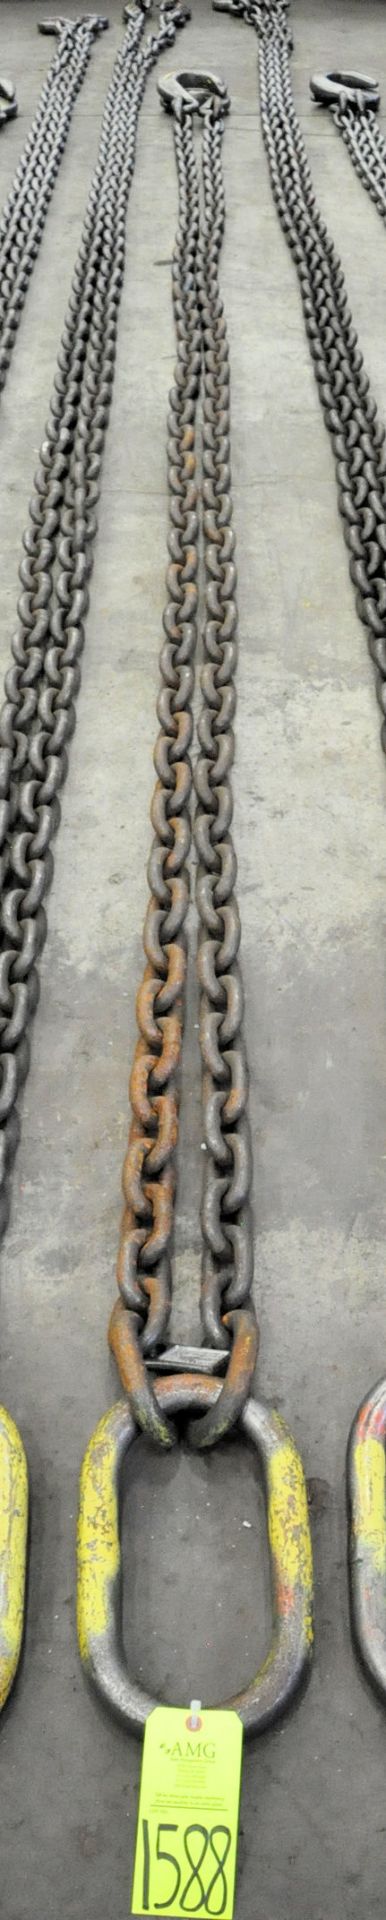 3/4" Link x 16' Long 2-Hook Chain Sling, Cert Tag, (G-21), (Yellow Tag)